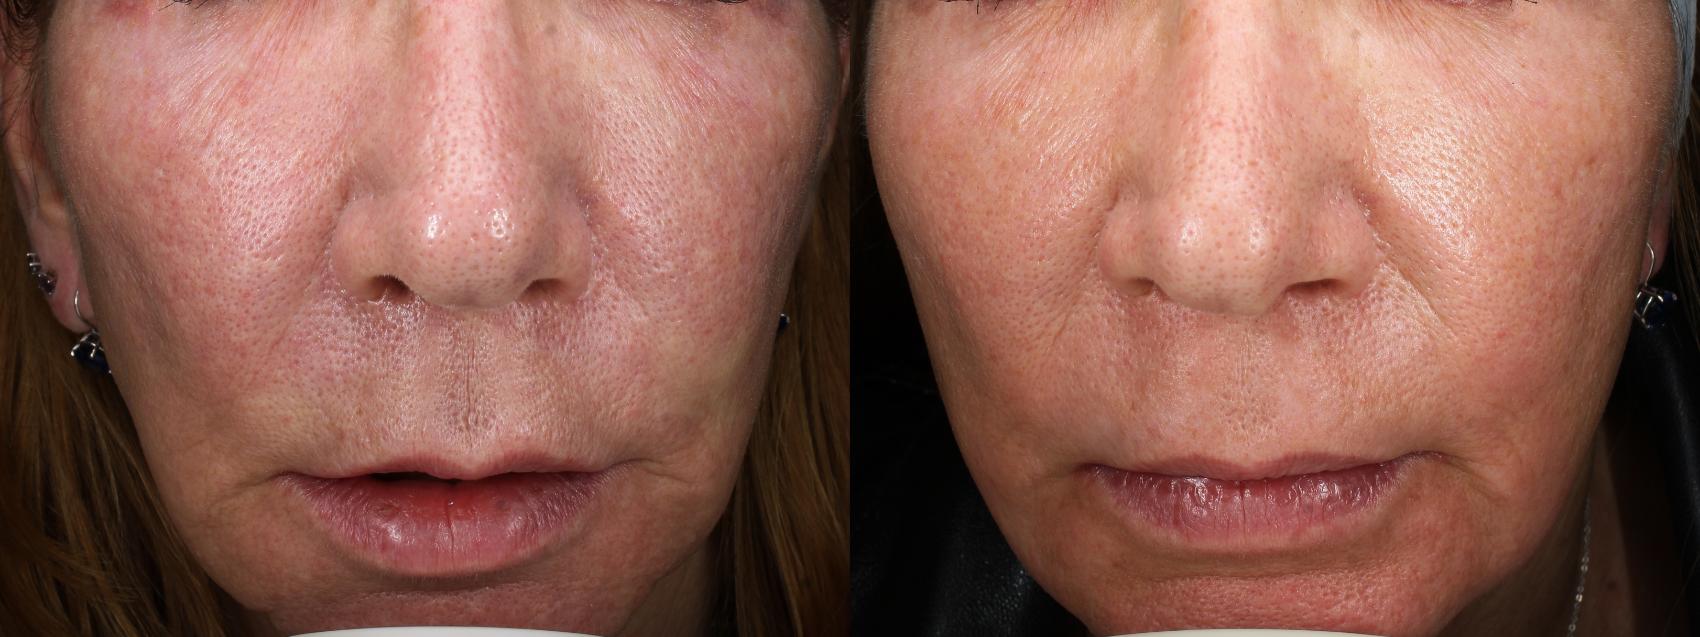 Before & After Laser Treatments Result 673 Front View in San Diego, Carlsbad, CA